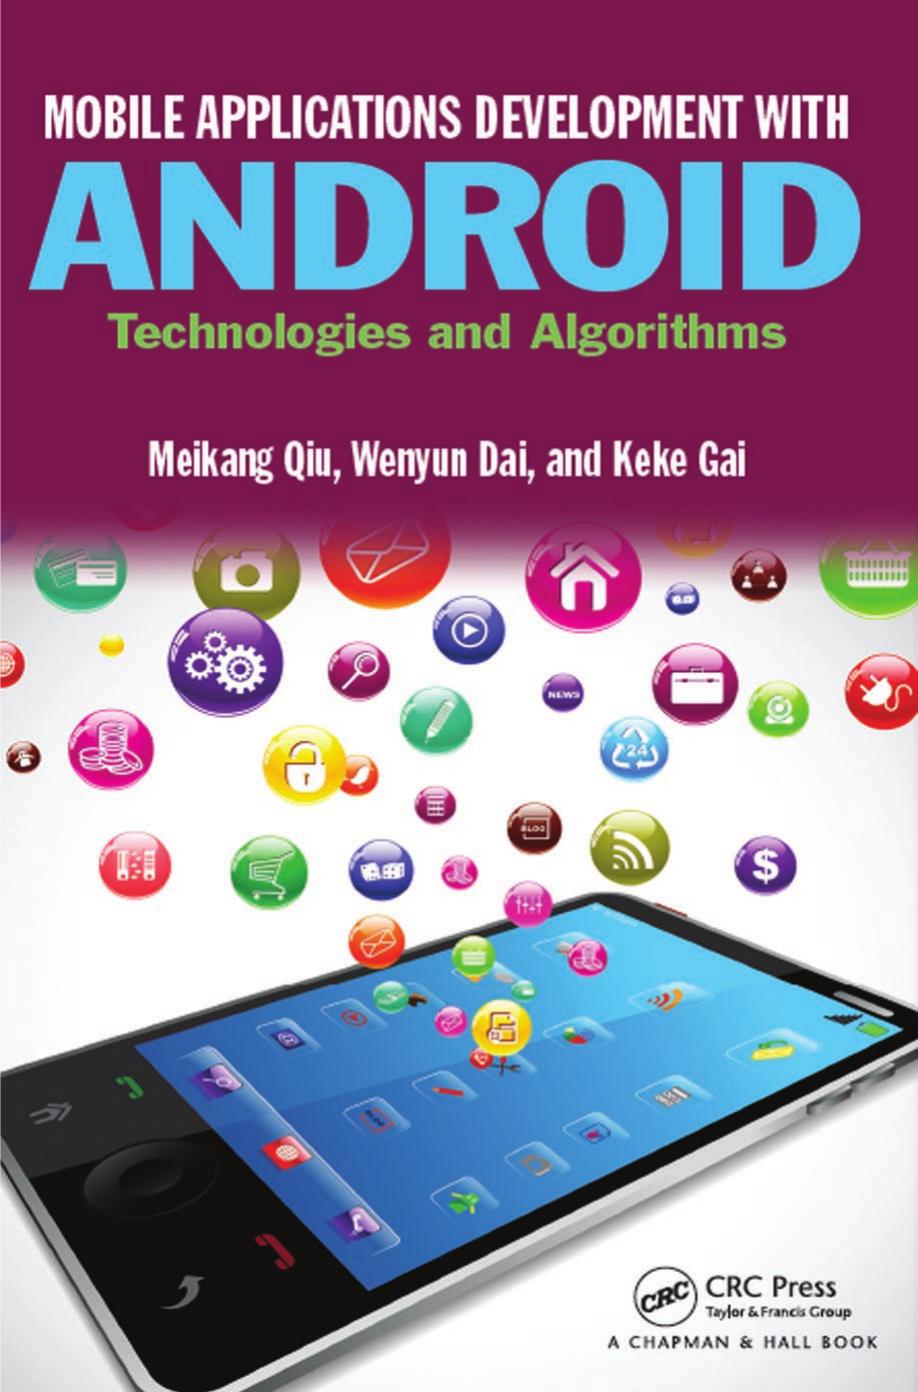 Mobile applications development with Android  technologies andalgorithms,(2017)